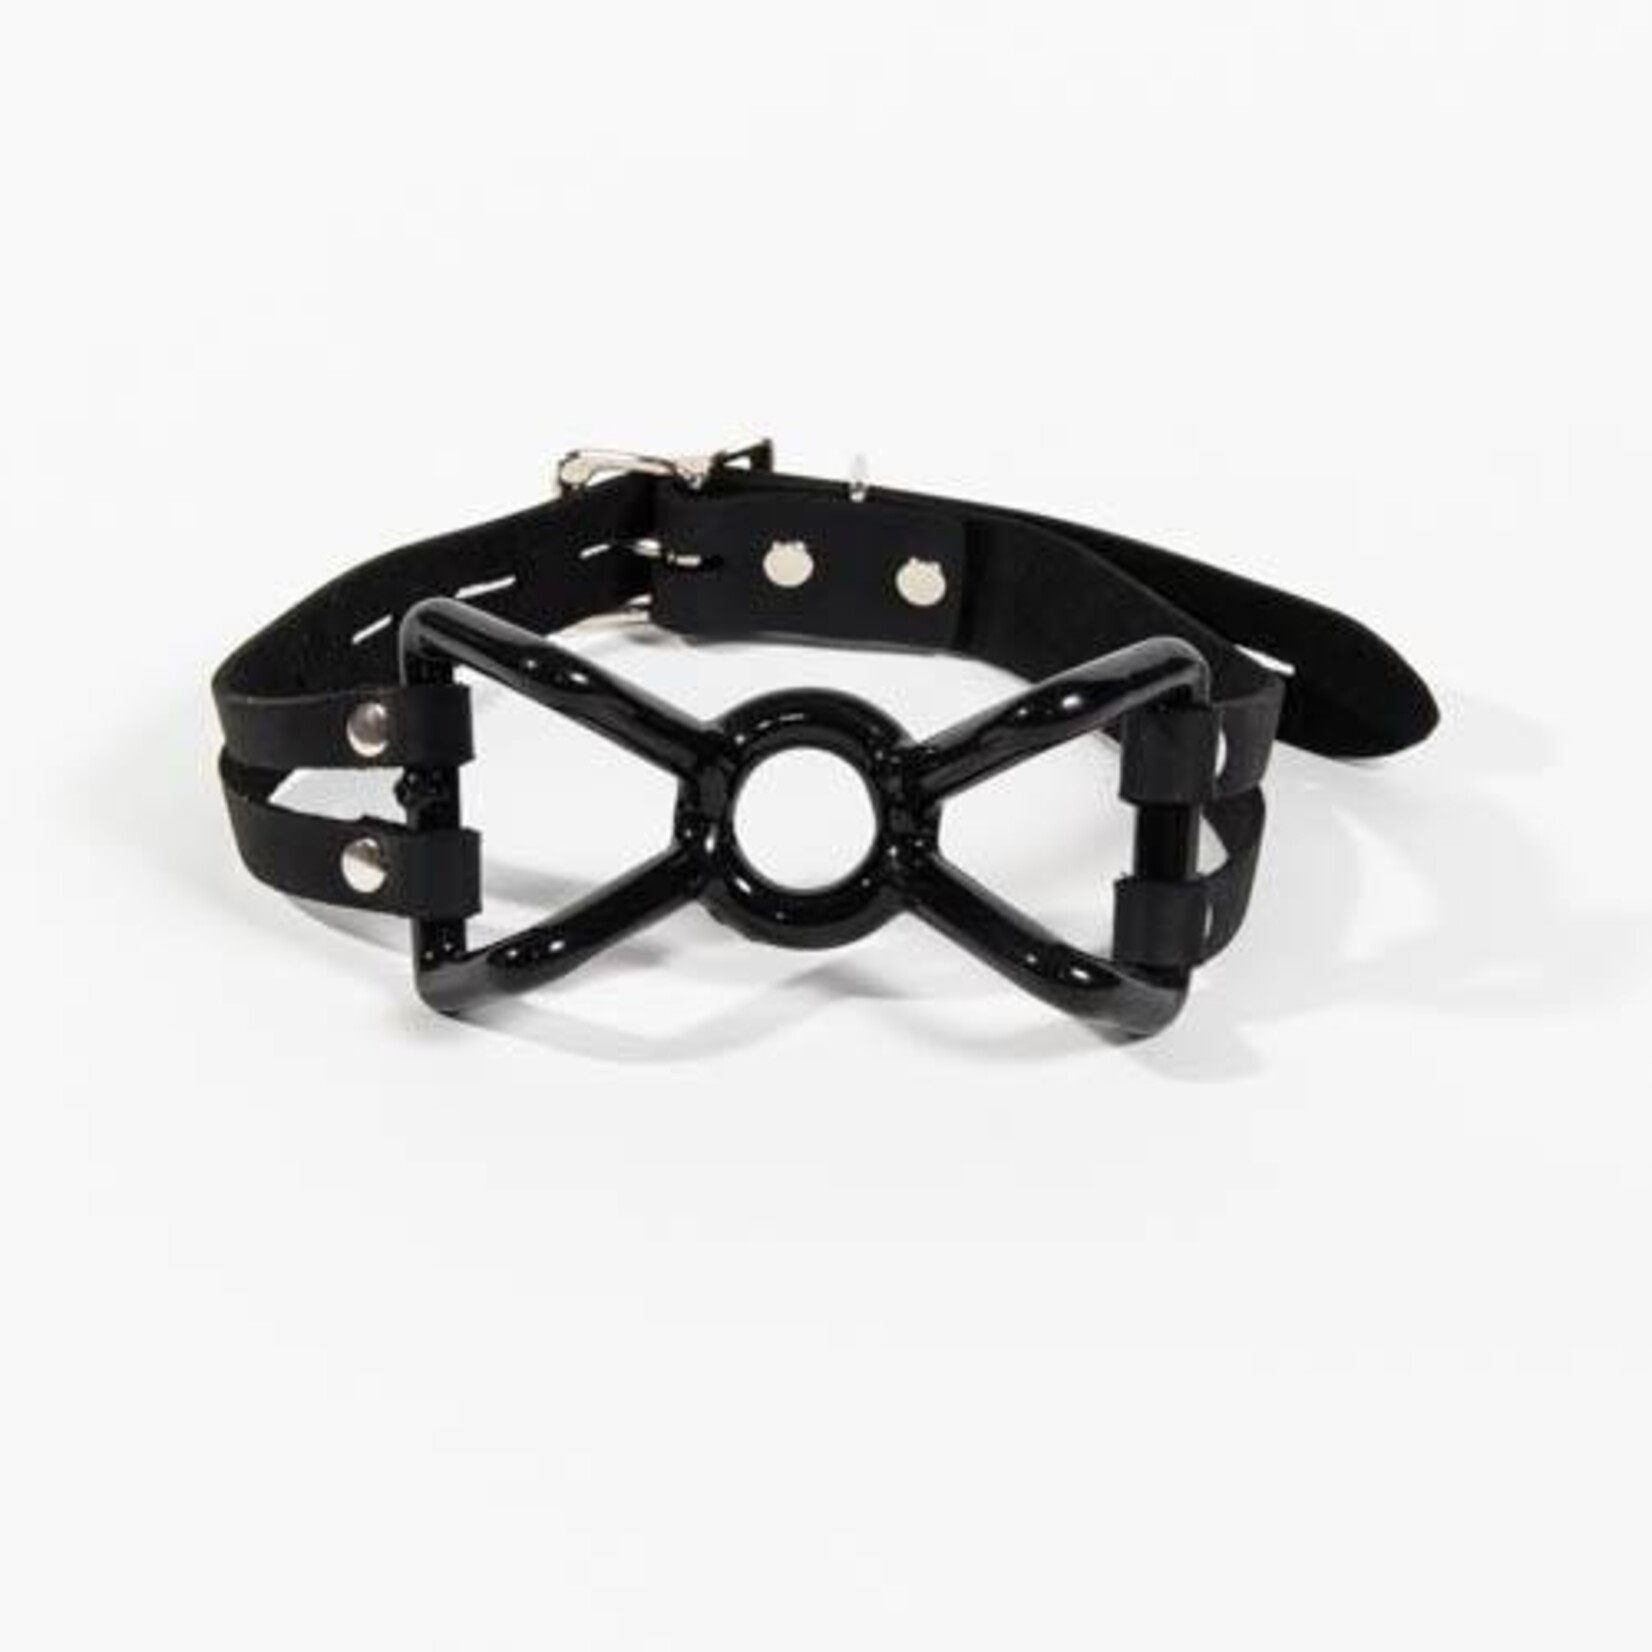 Kookie Intl. Rubber Coated Spider Gag with Leather Strap